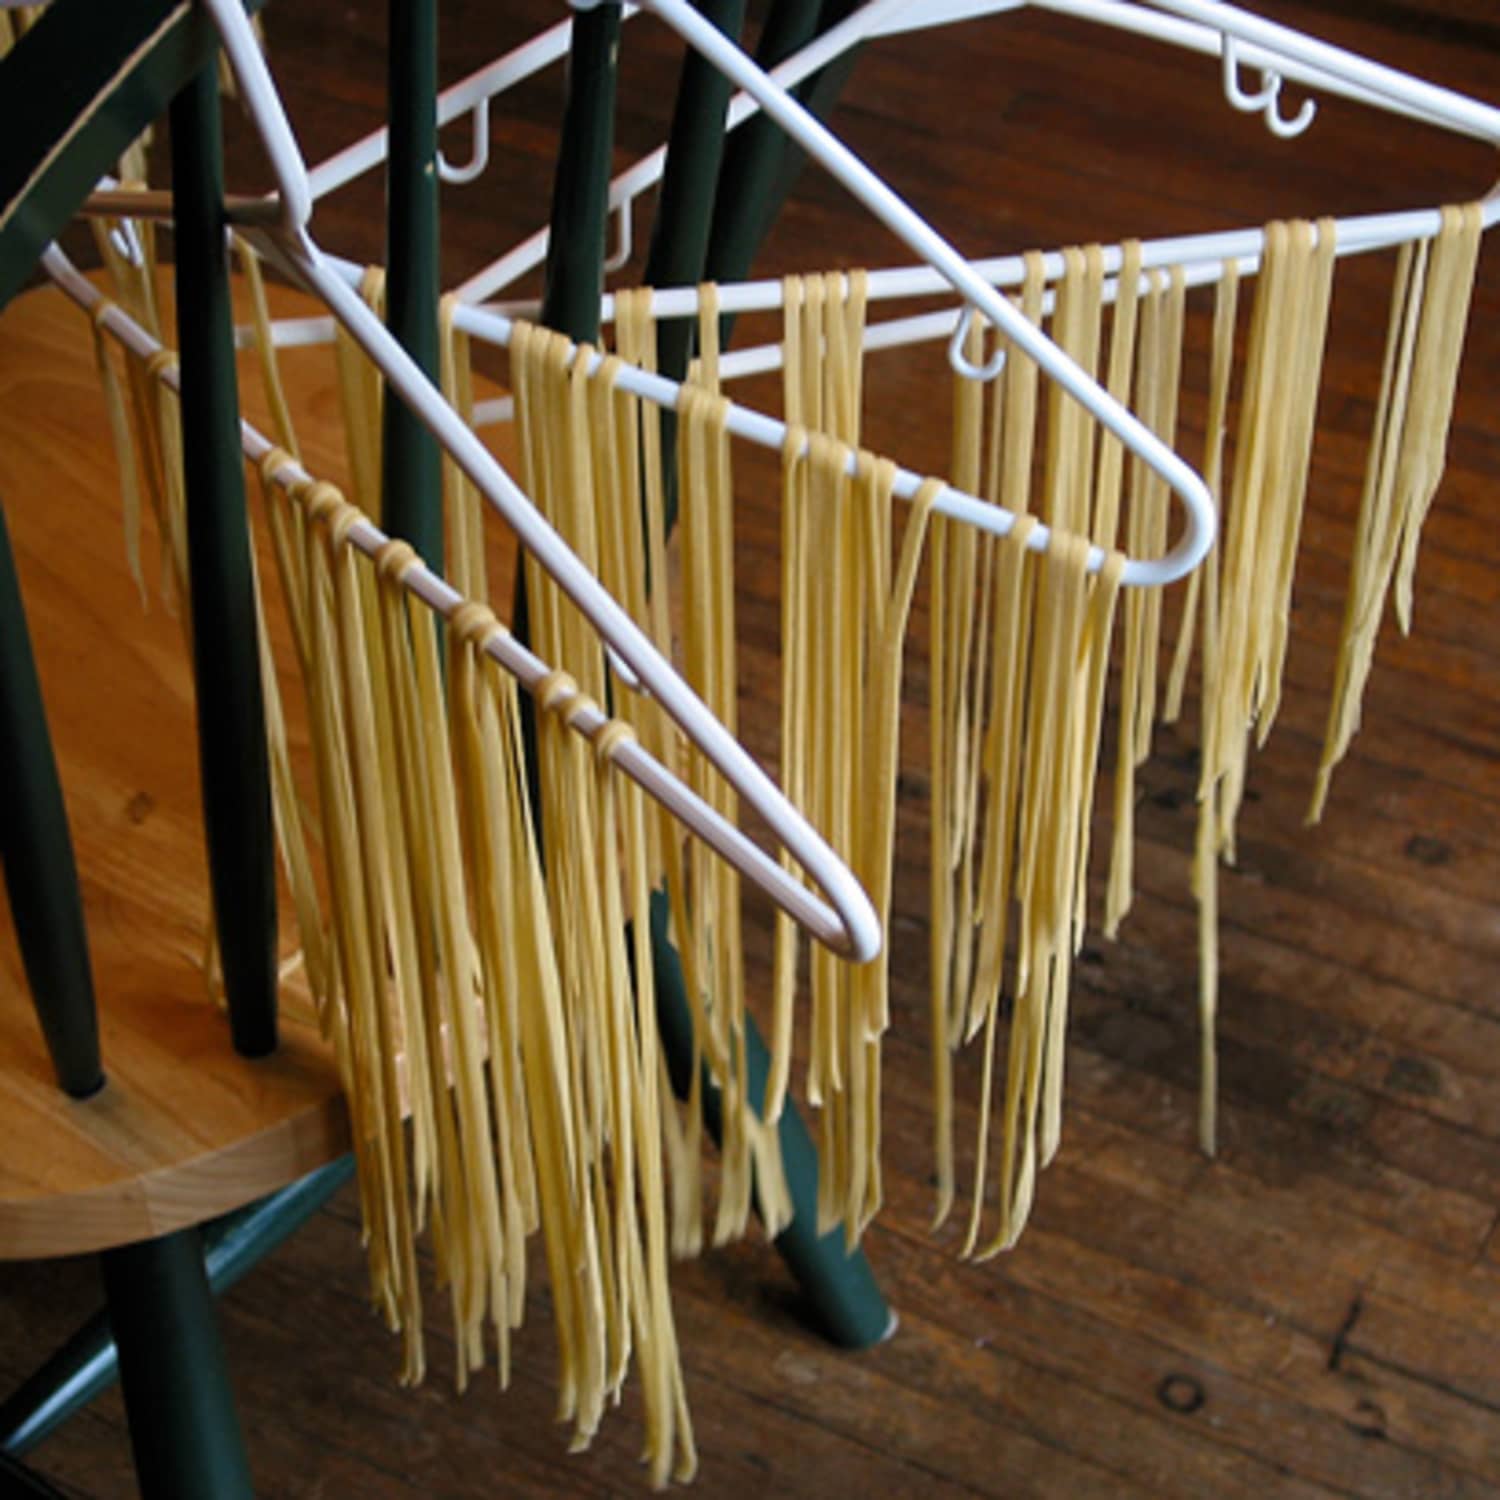 How To Dry Pasta Without a Rack | Kitchn